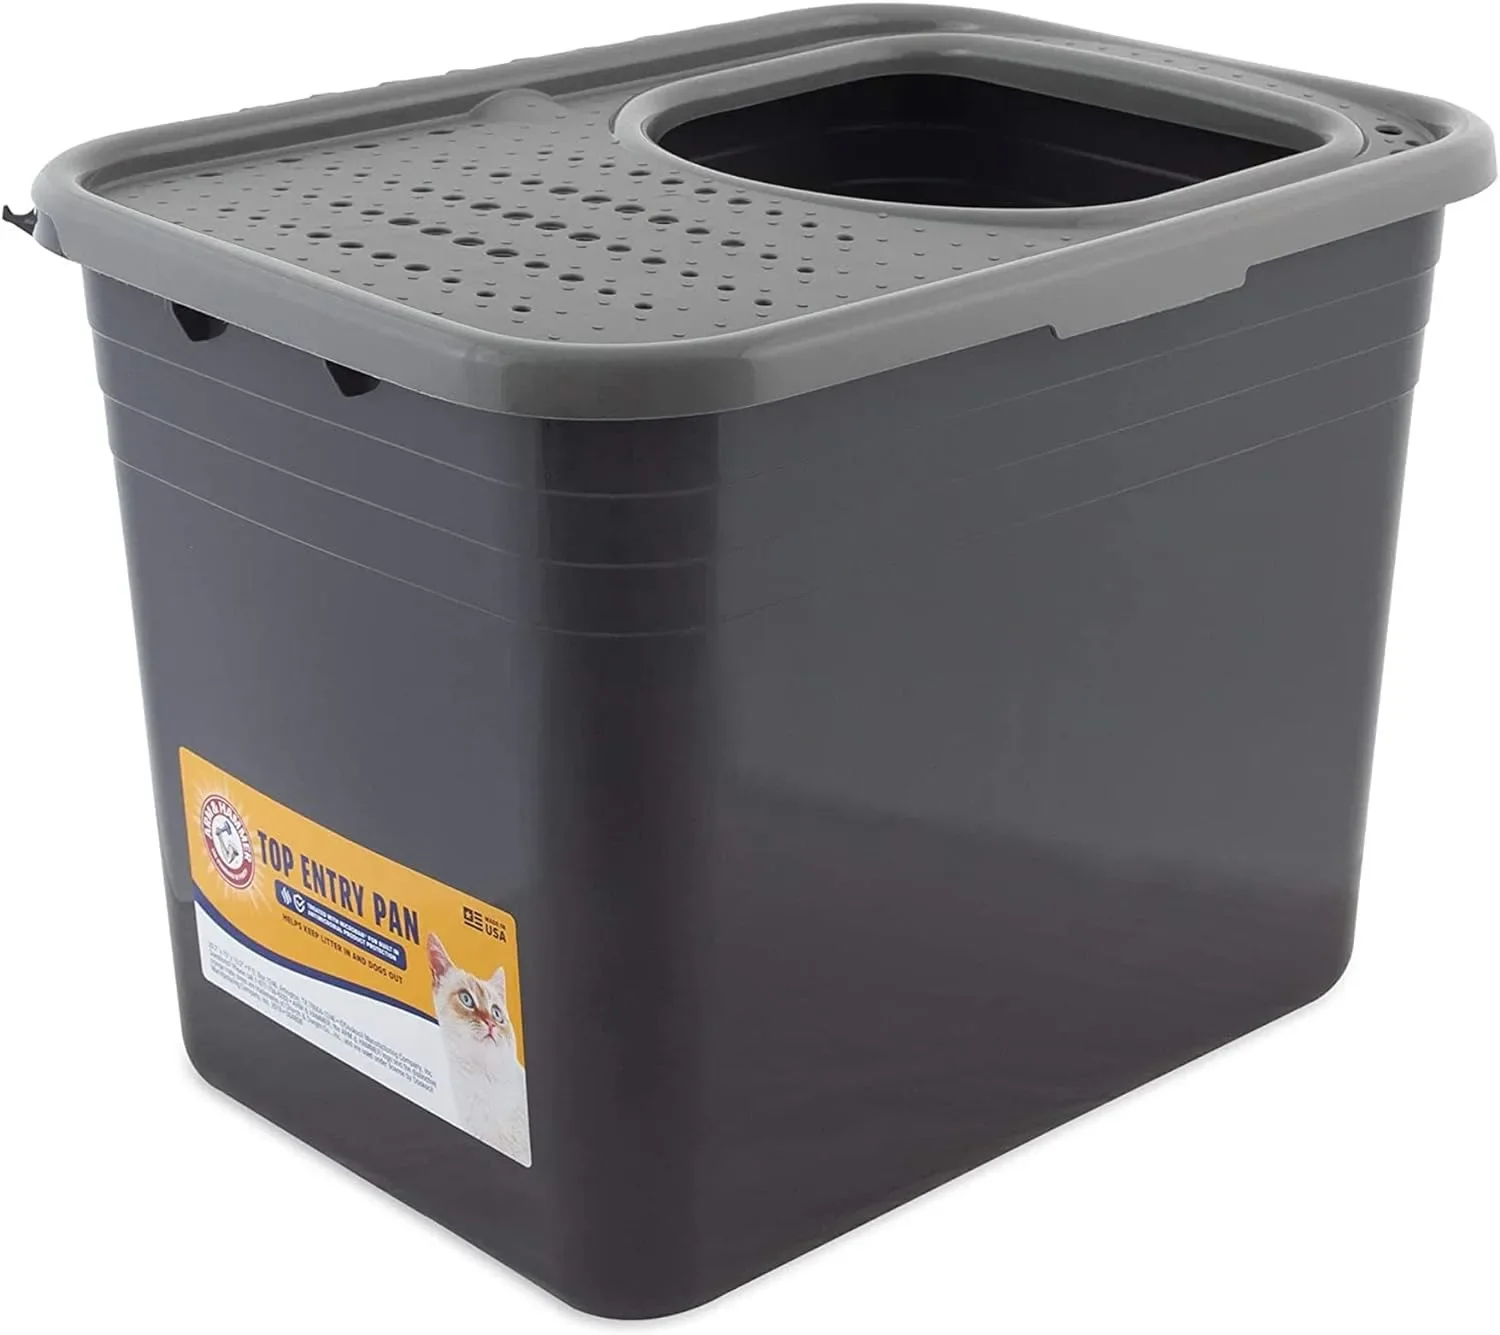 

Premium Top Entry Litter Box with Filter to Clean Paws and Microban, Made in USA 20"L x 15"W x 15"H